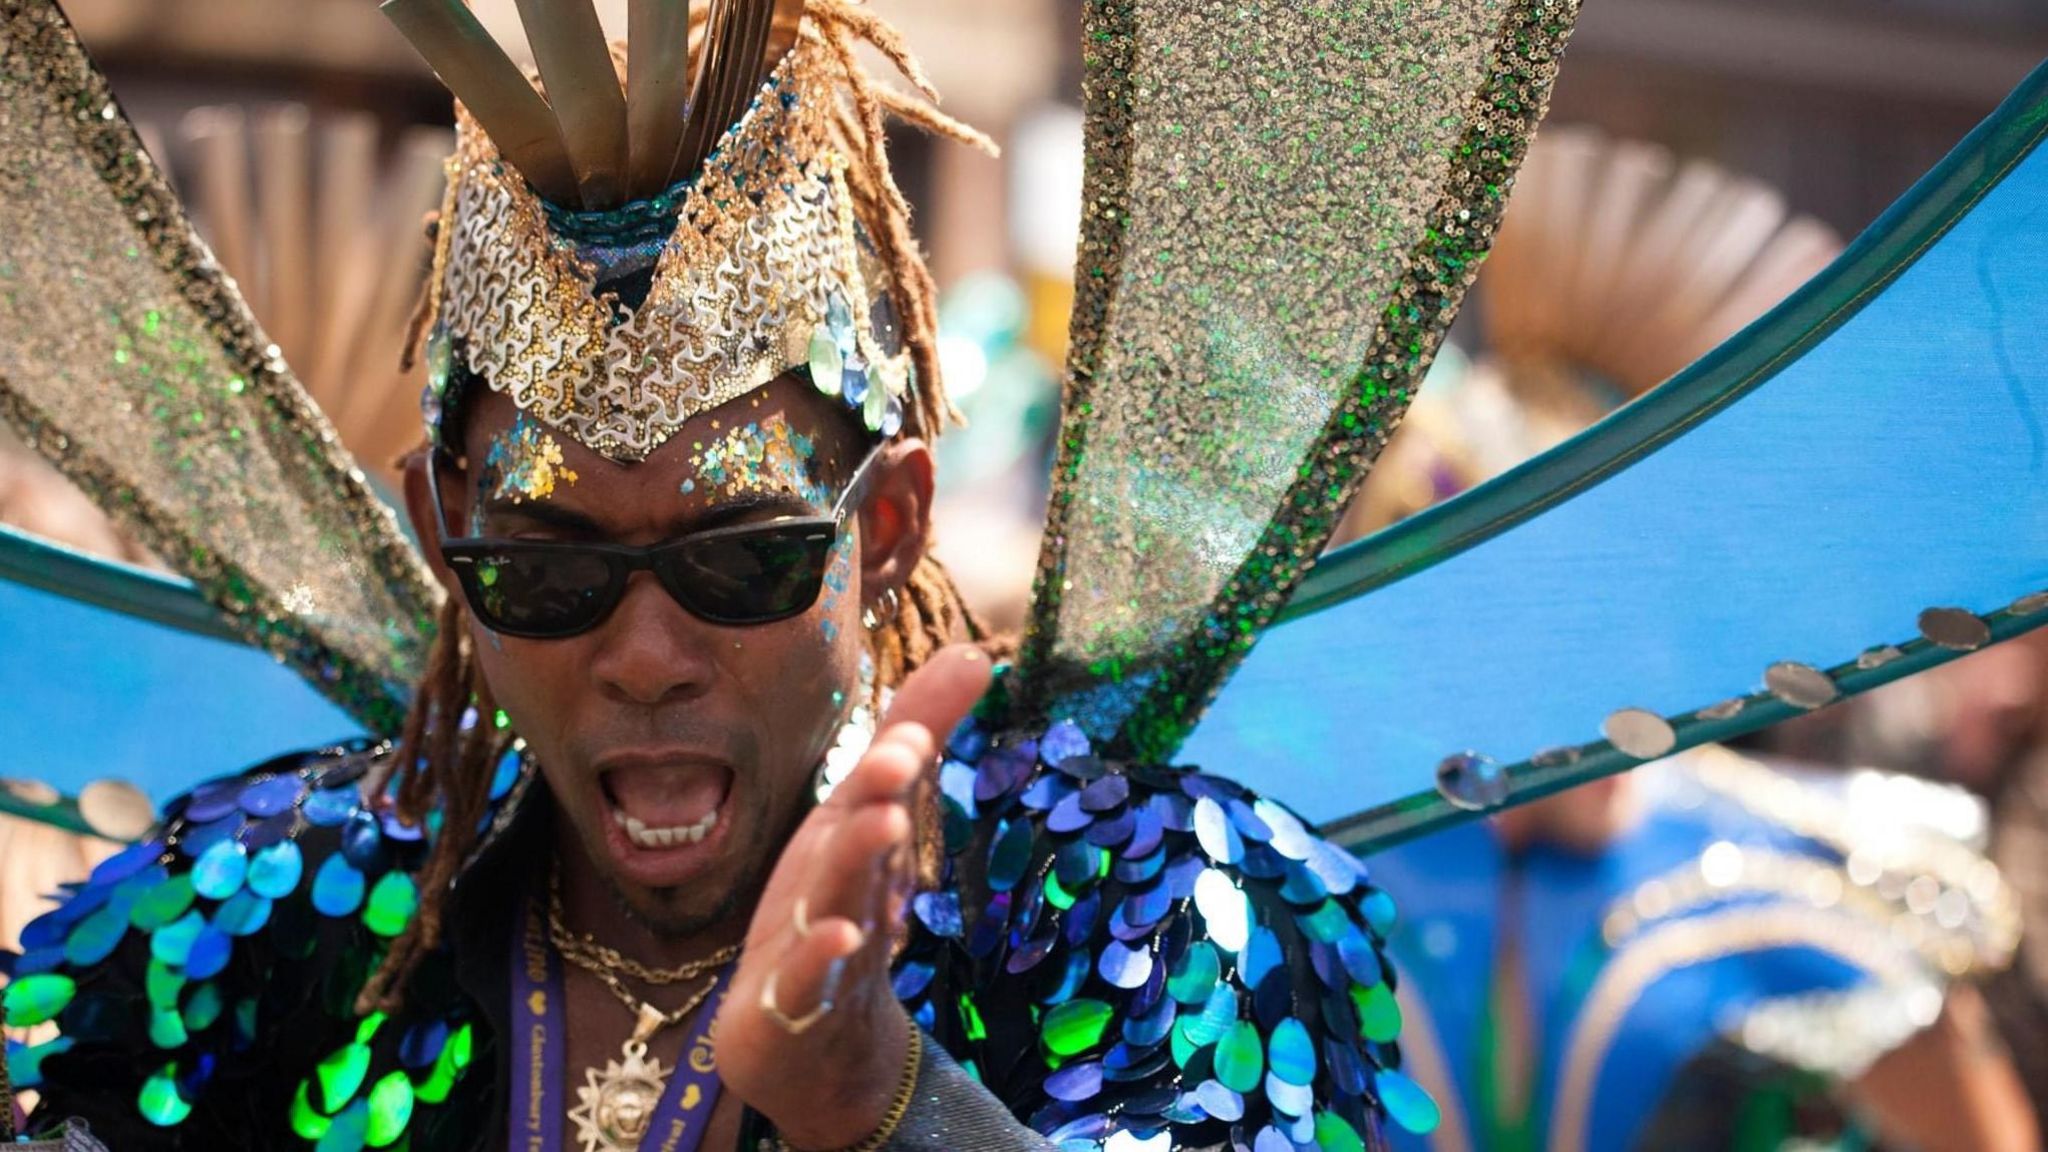 A carnival goer wearing blue sequin outfit and gold headband